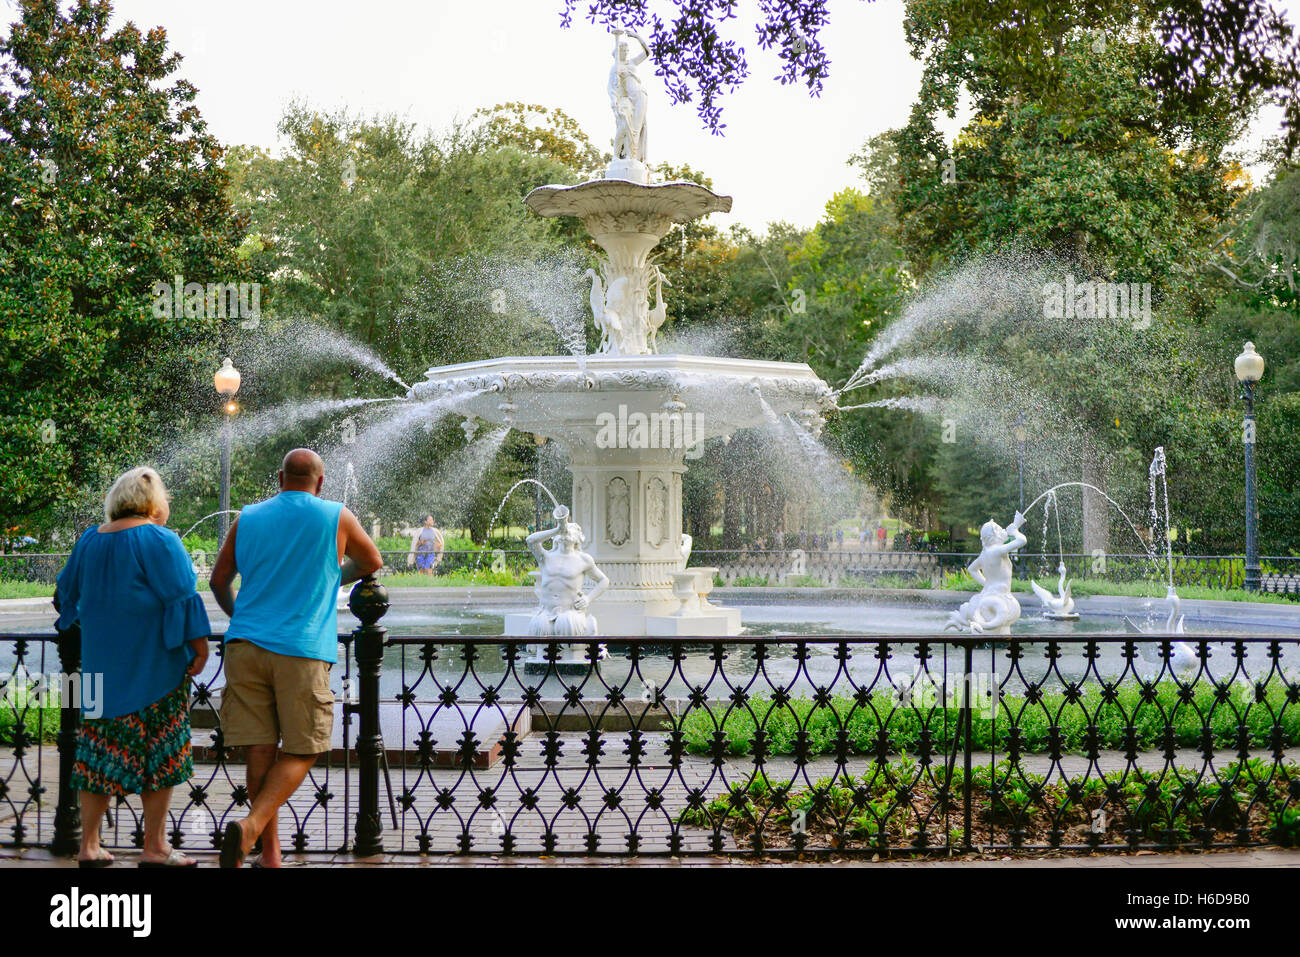 People enjoy & relax around the fanciful landmark fountain in Forsyth Park in historic downtown Savannah, GA Stock Photo